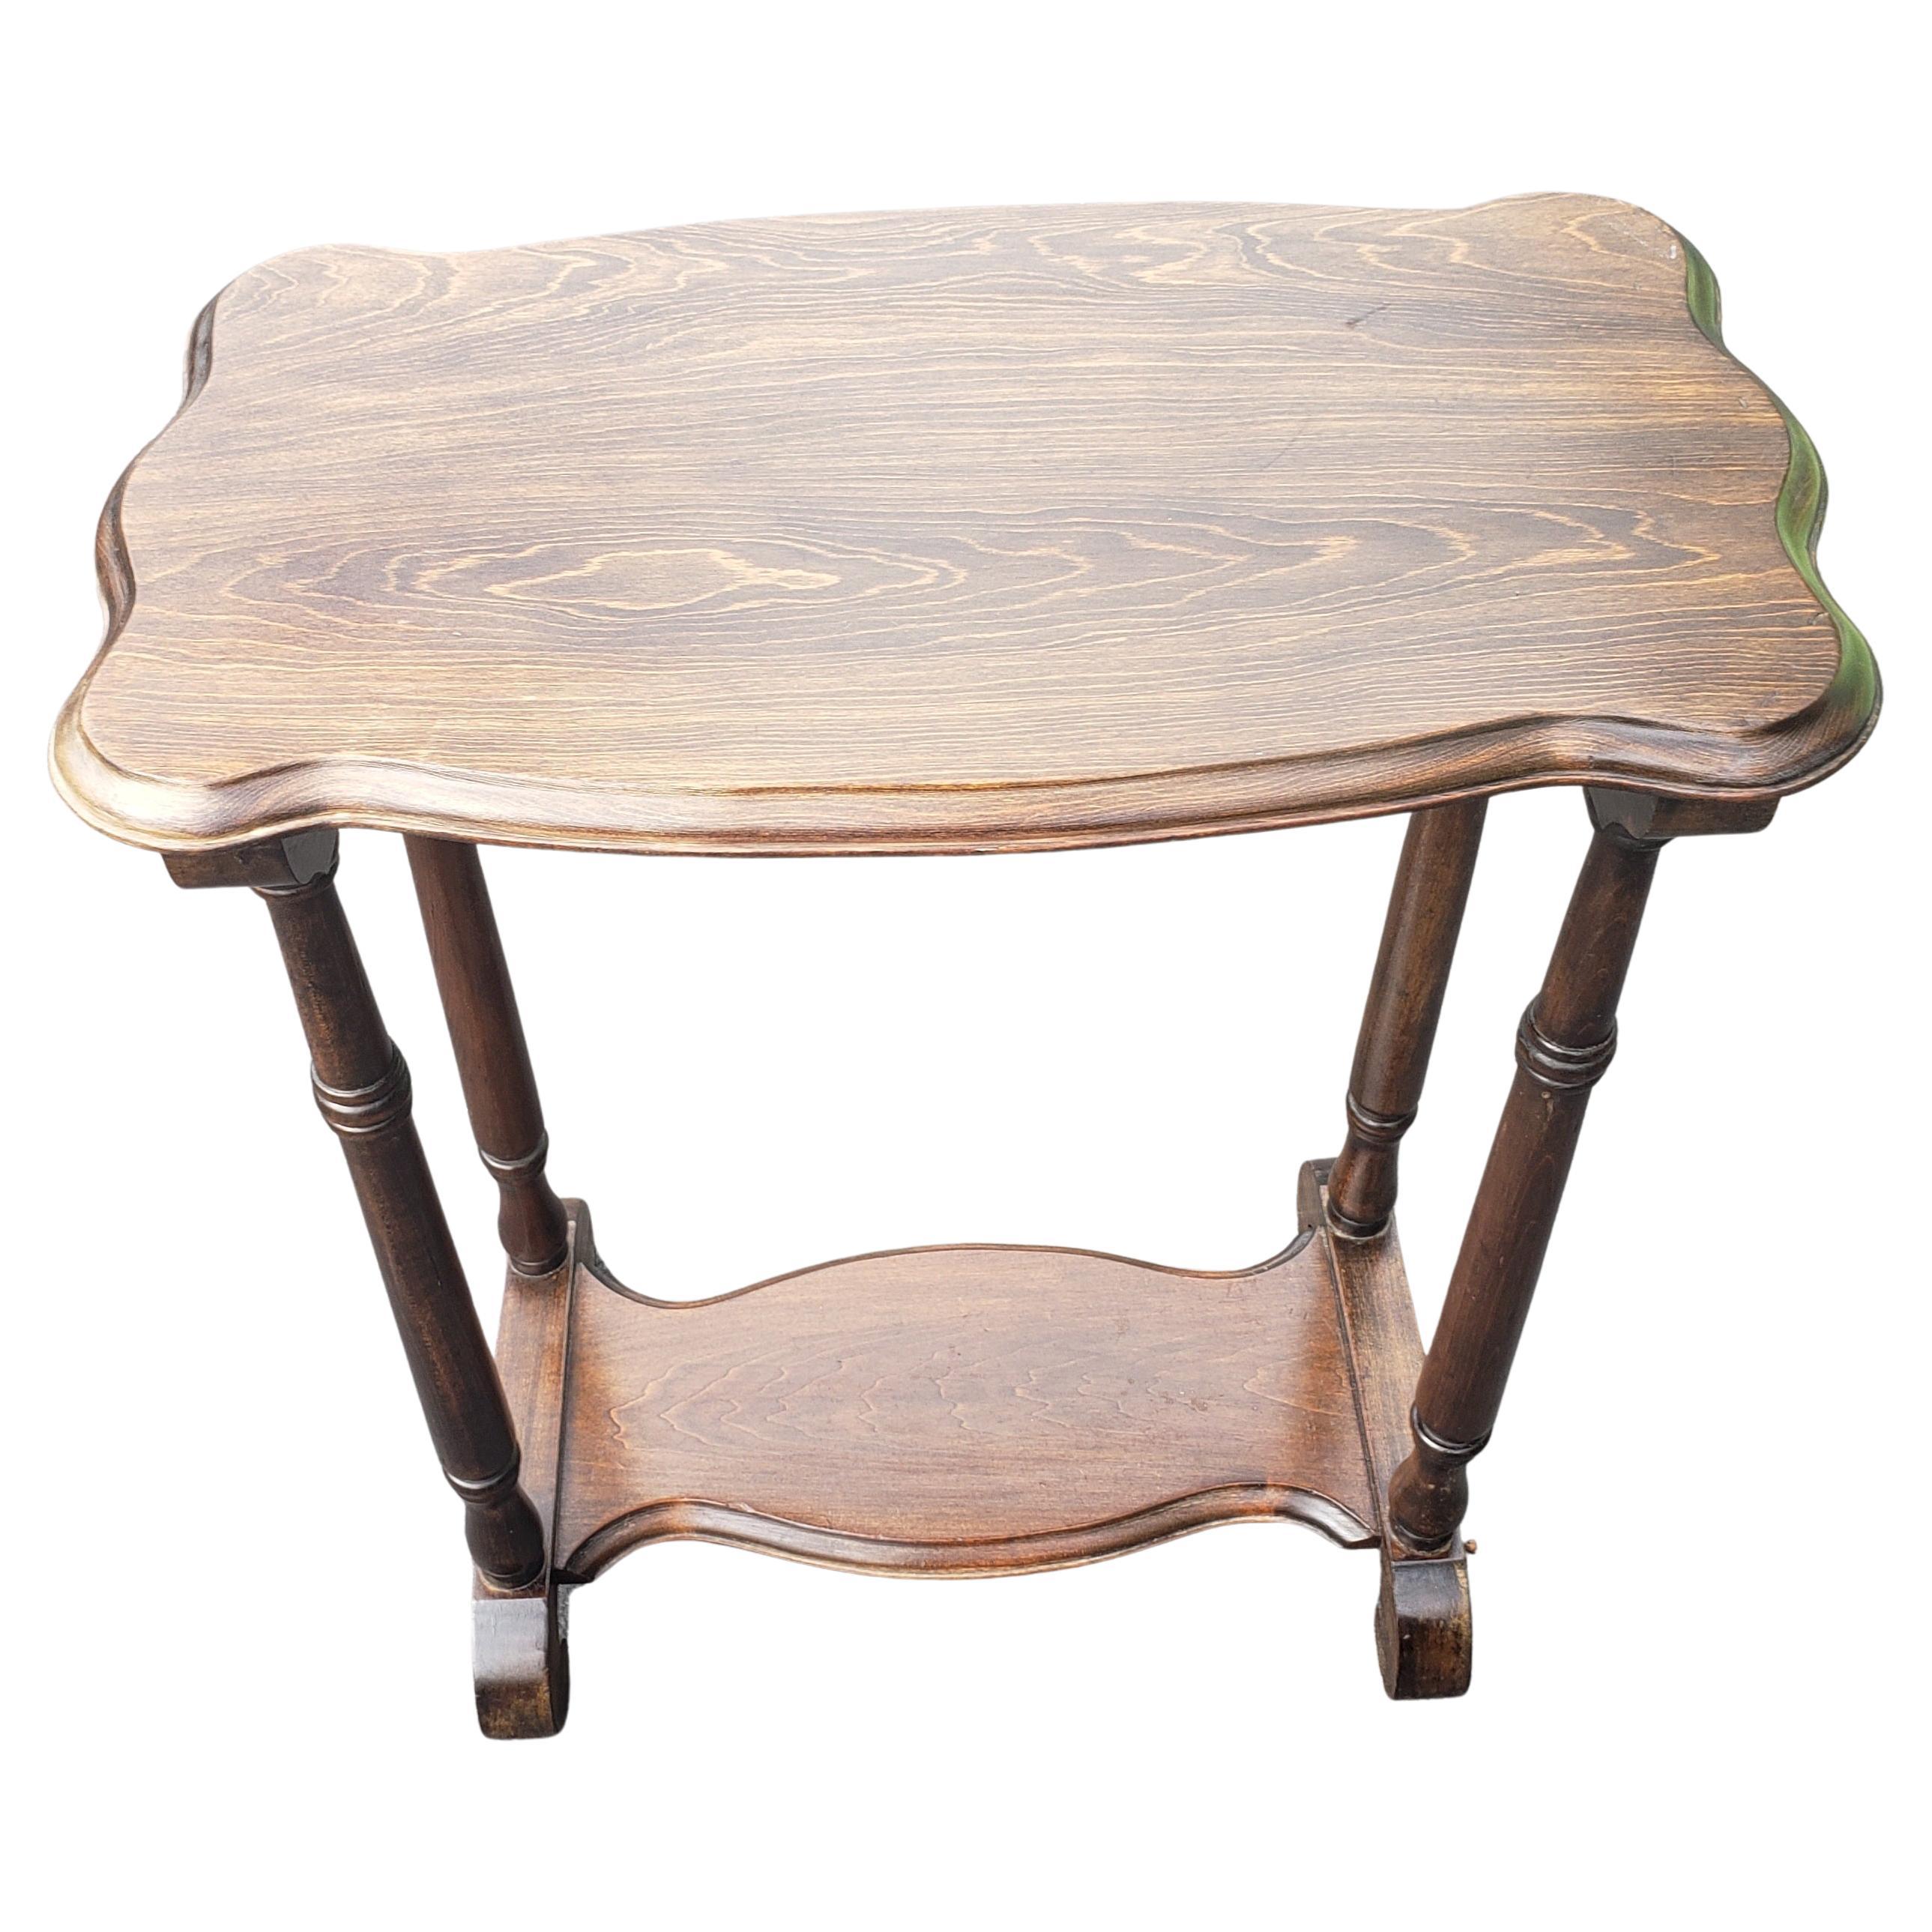 Hand-Crafted Vintage American Classical Walnut Tier Side Table, circa 1940s For Sale